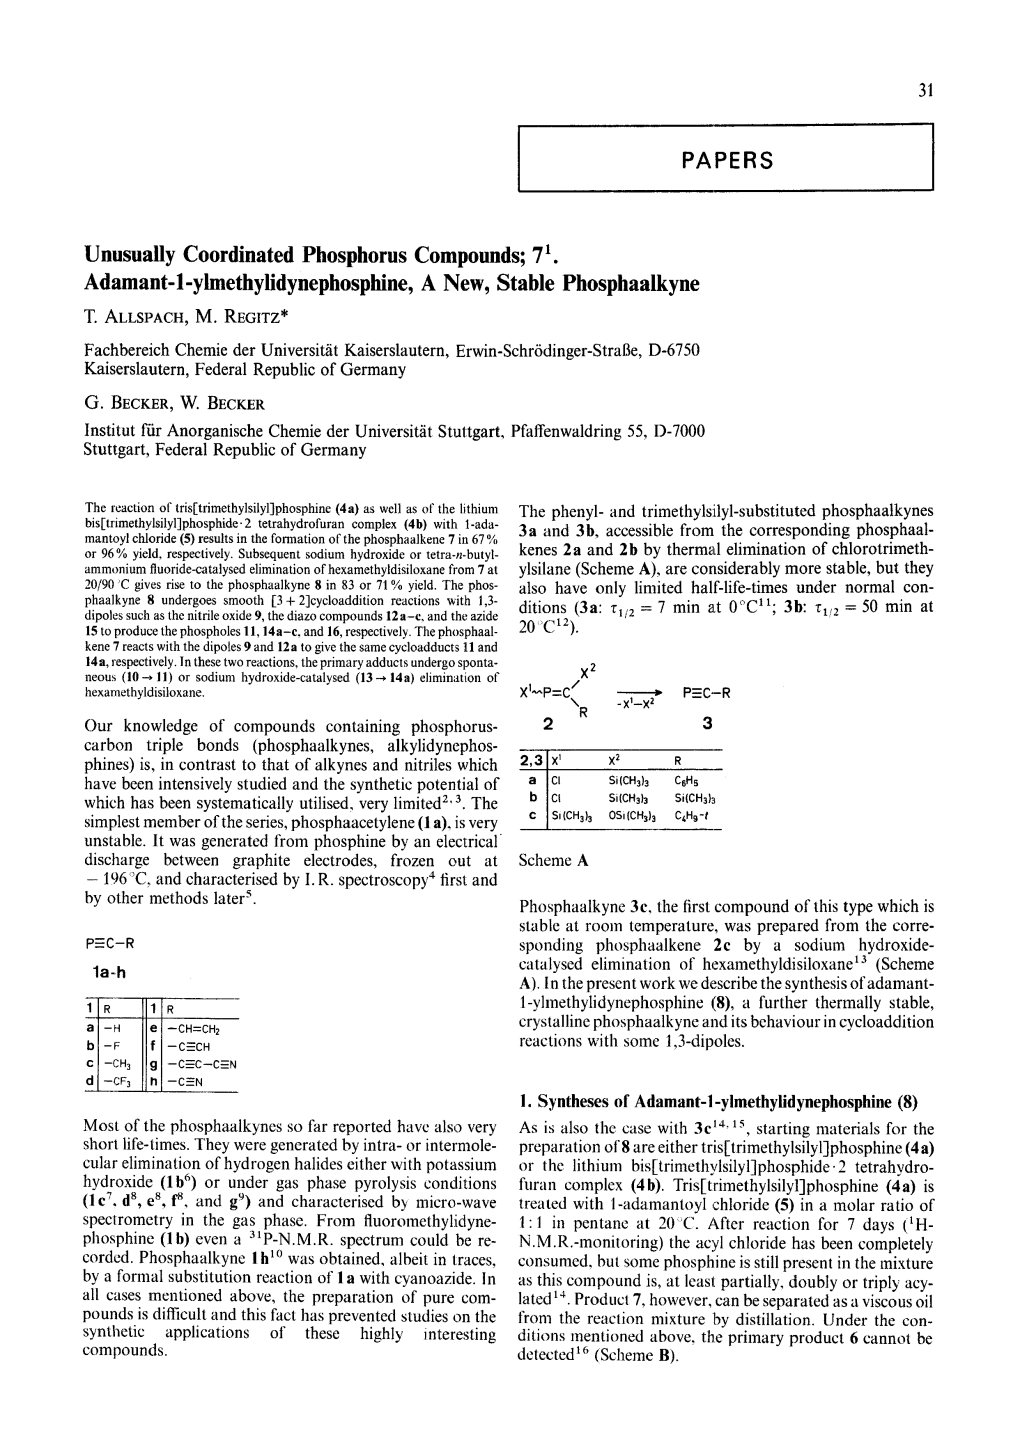 PAPERS Unusually Coordinated Phosphorus Compounds; 71